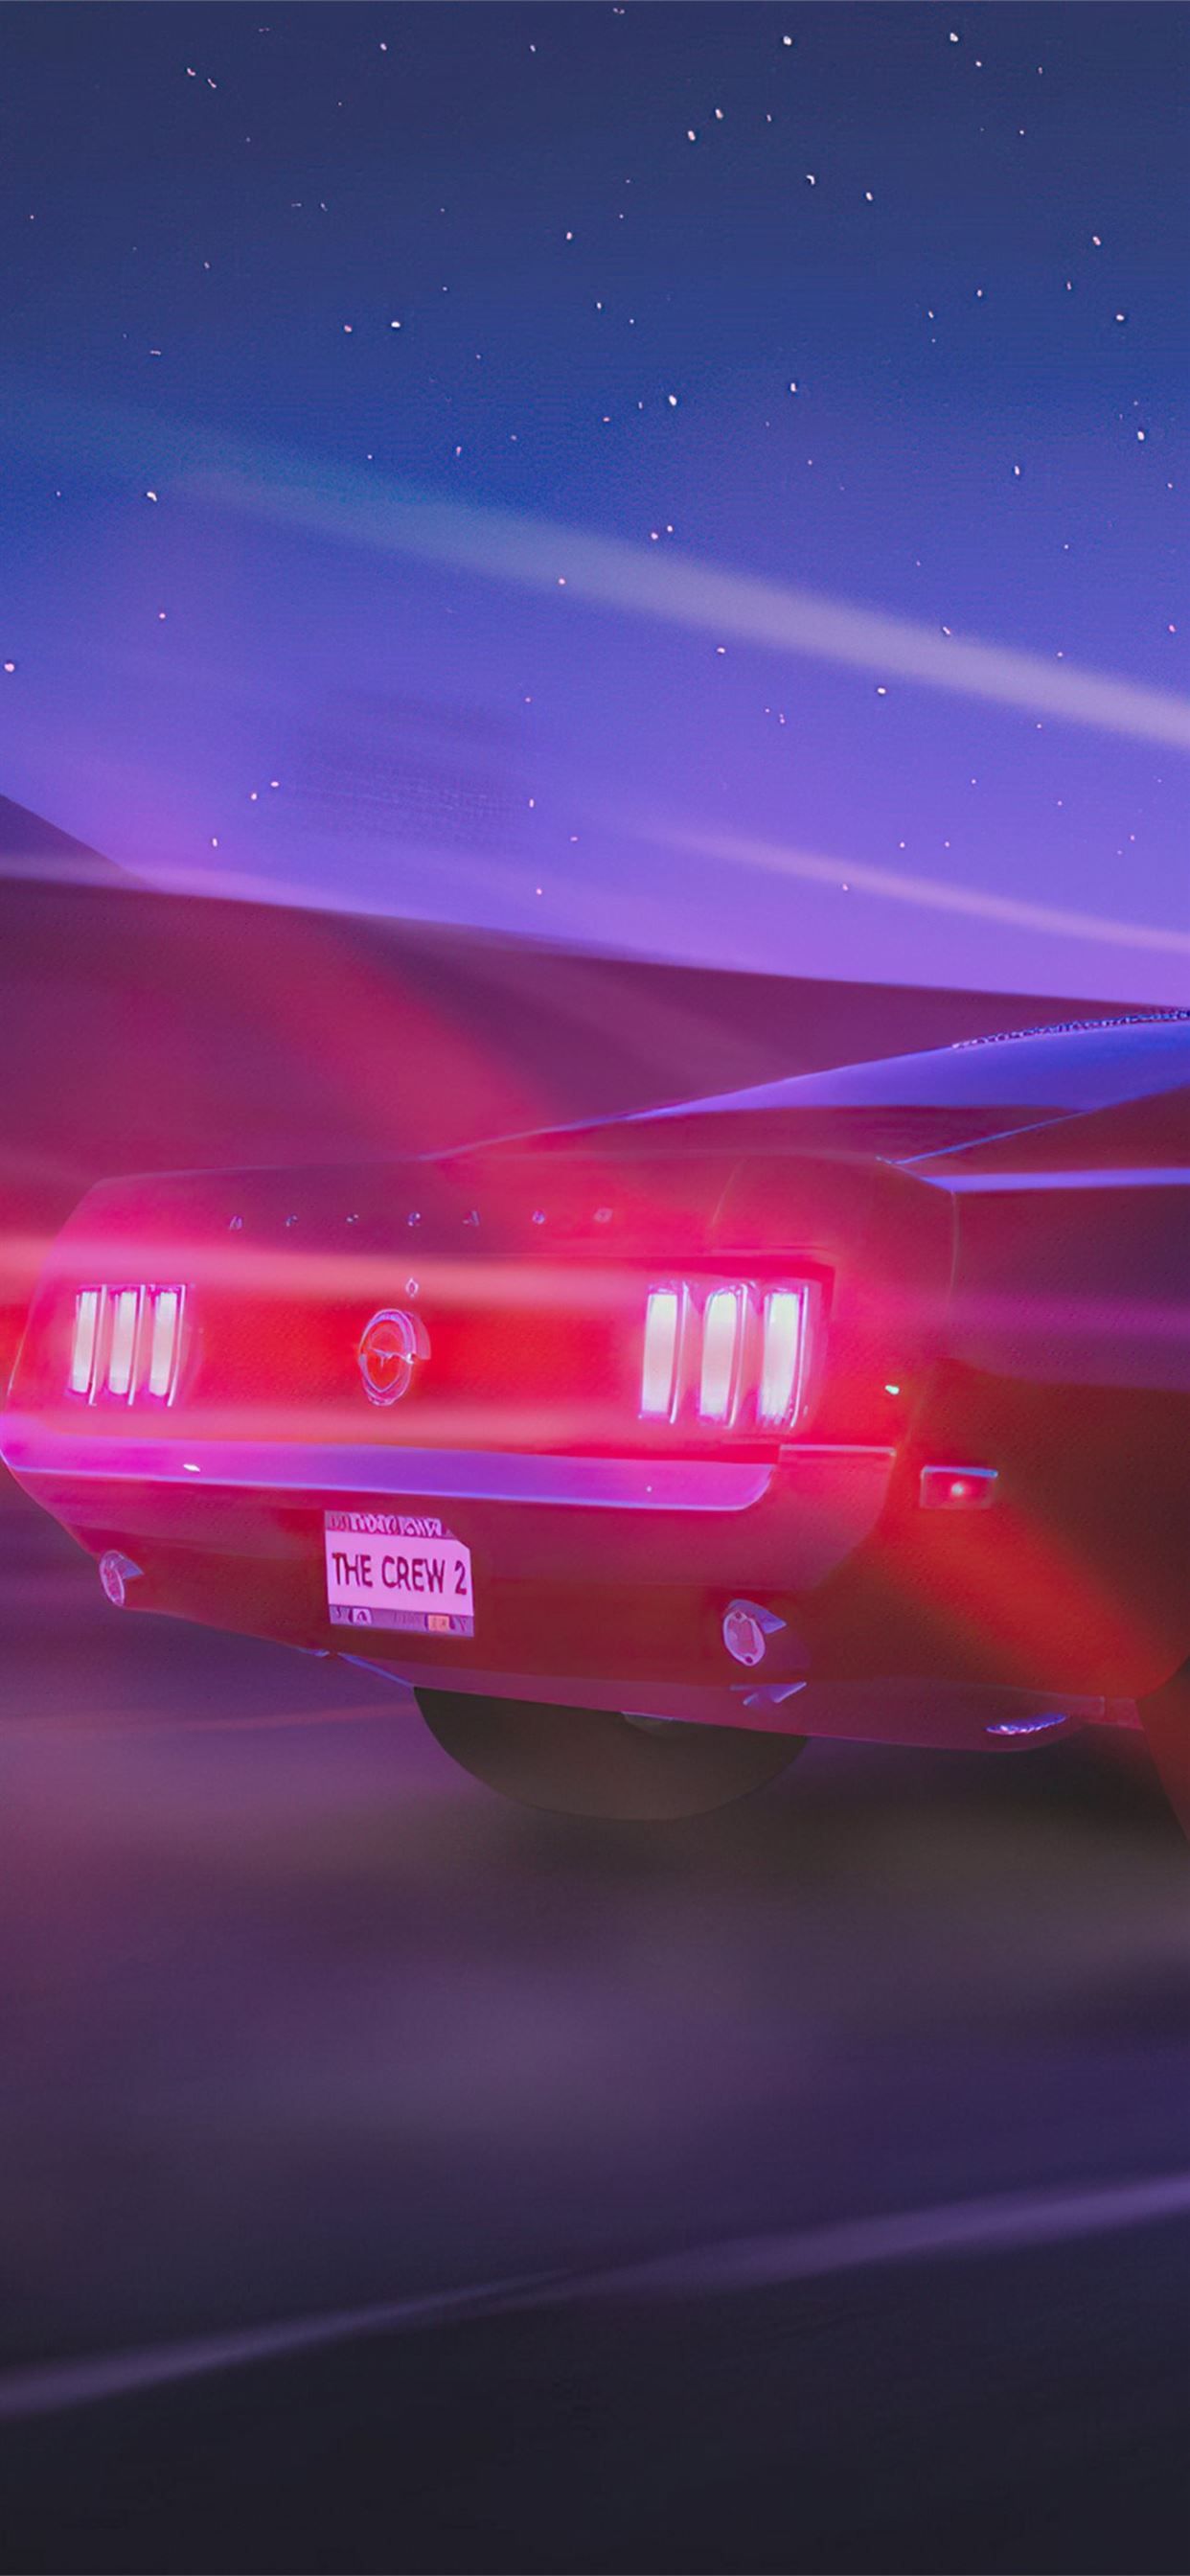 ford mustang the crew 2 game 4k iPhone X Wallpaper Free Download